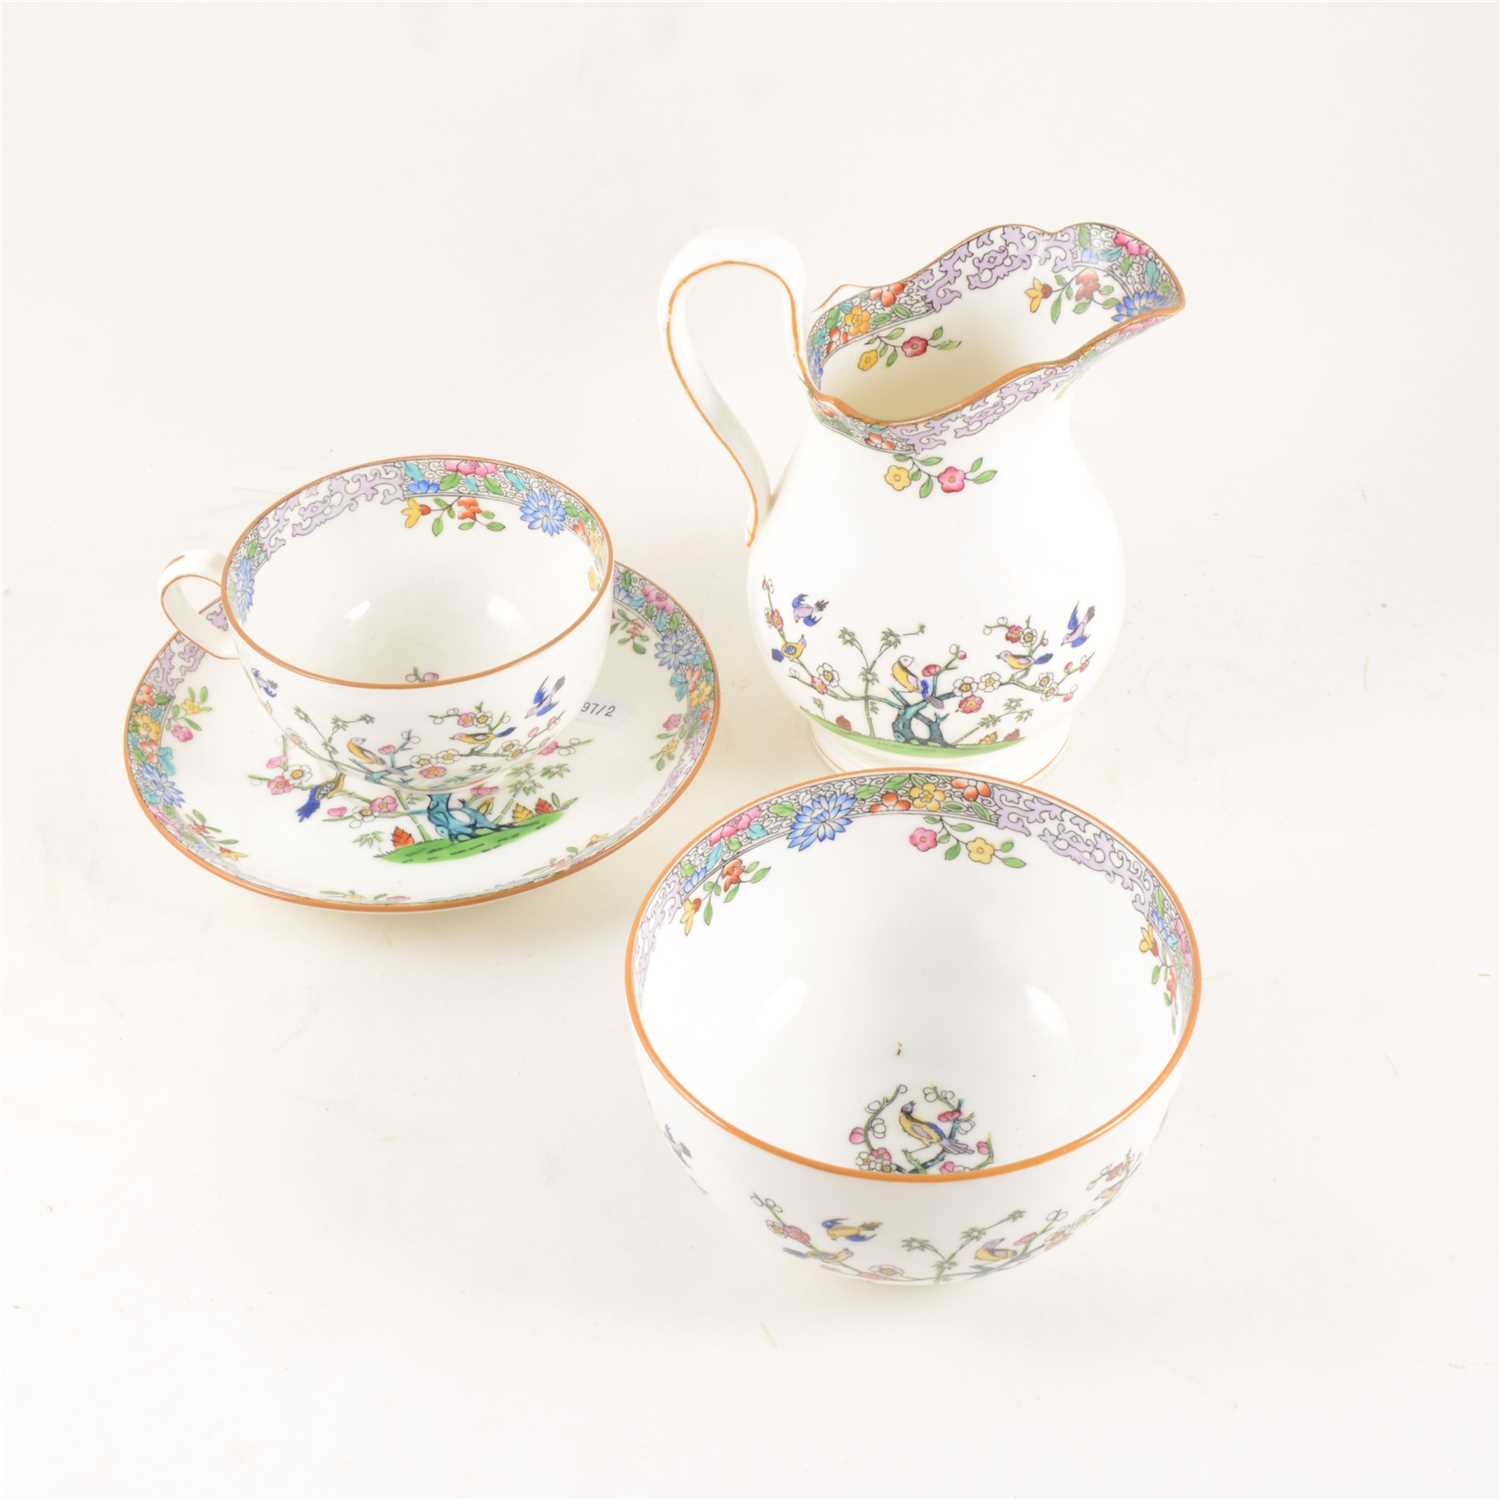 Lot 88 - Minton bone china tea set, decorated with songbirds and blossom.